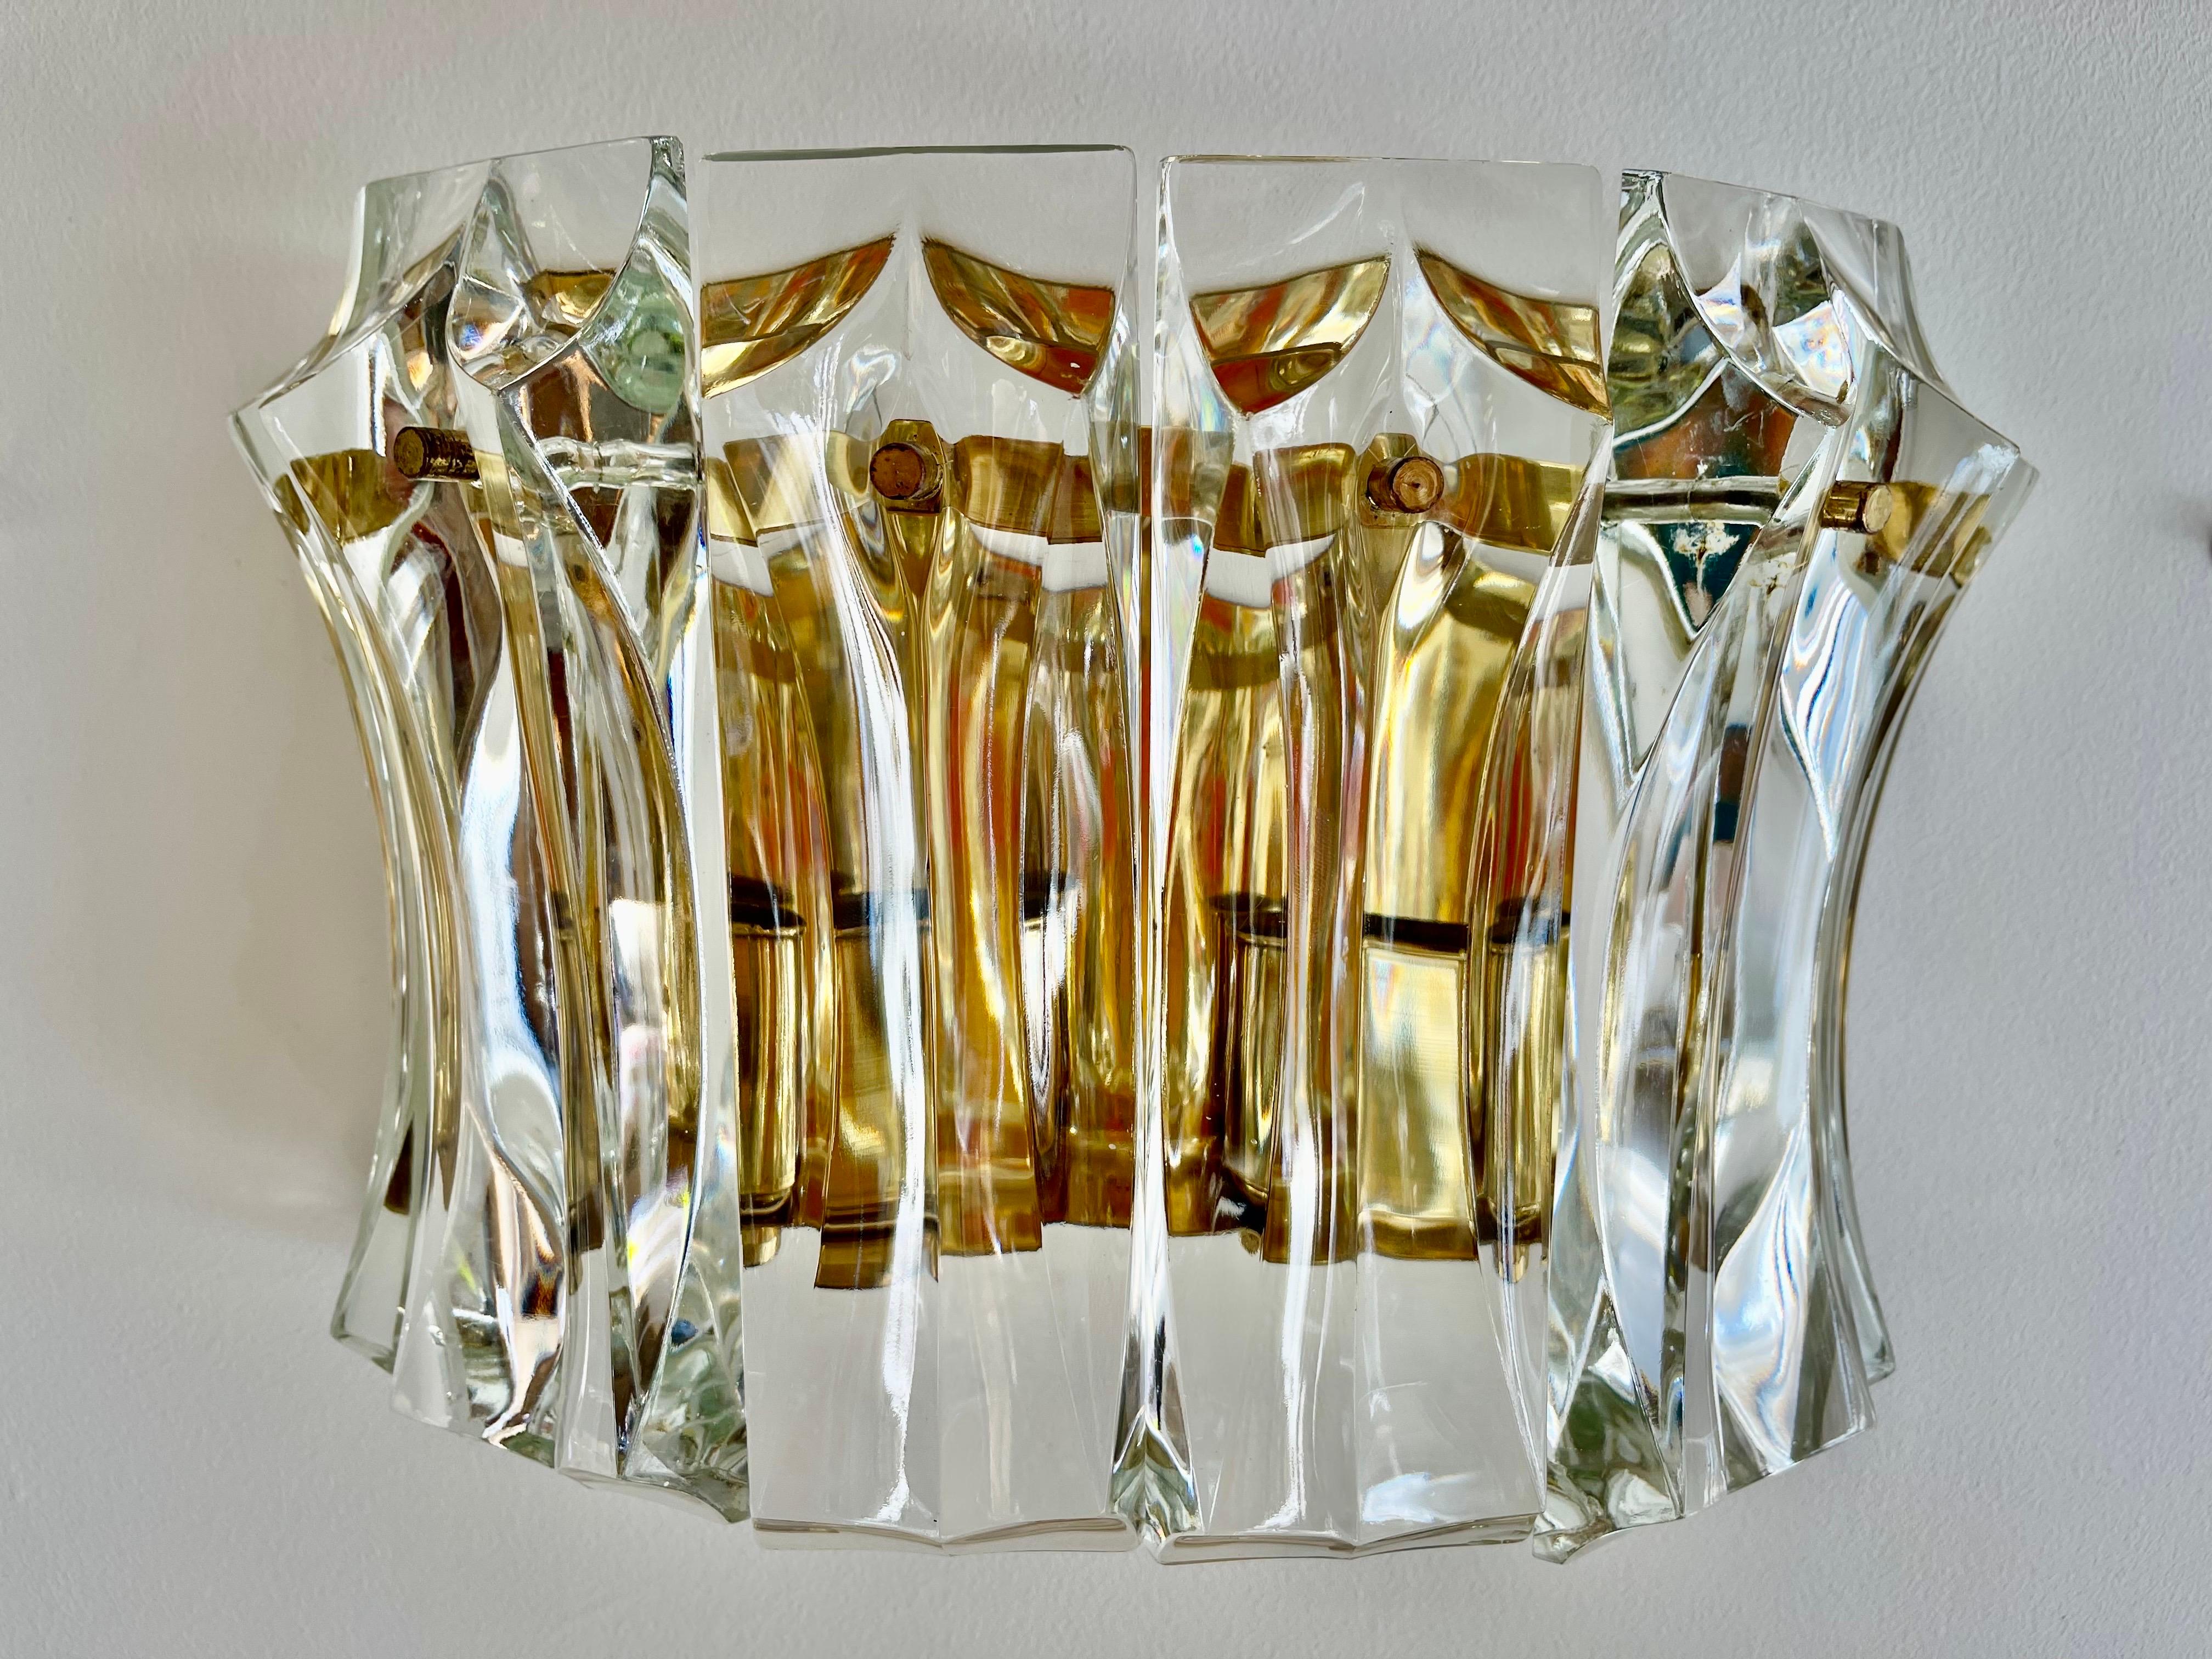 Venini wall lighting murano glass crystal . The design and the quality of the glass crystal make this piece the best of the design.

discount shipping * private quote option 

Venini is an Italian company that is known for its high-quality,